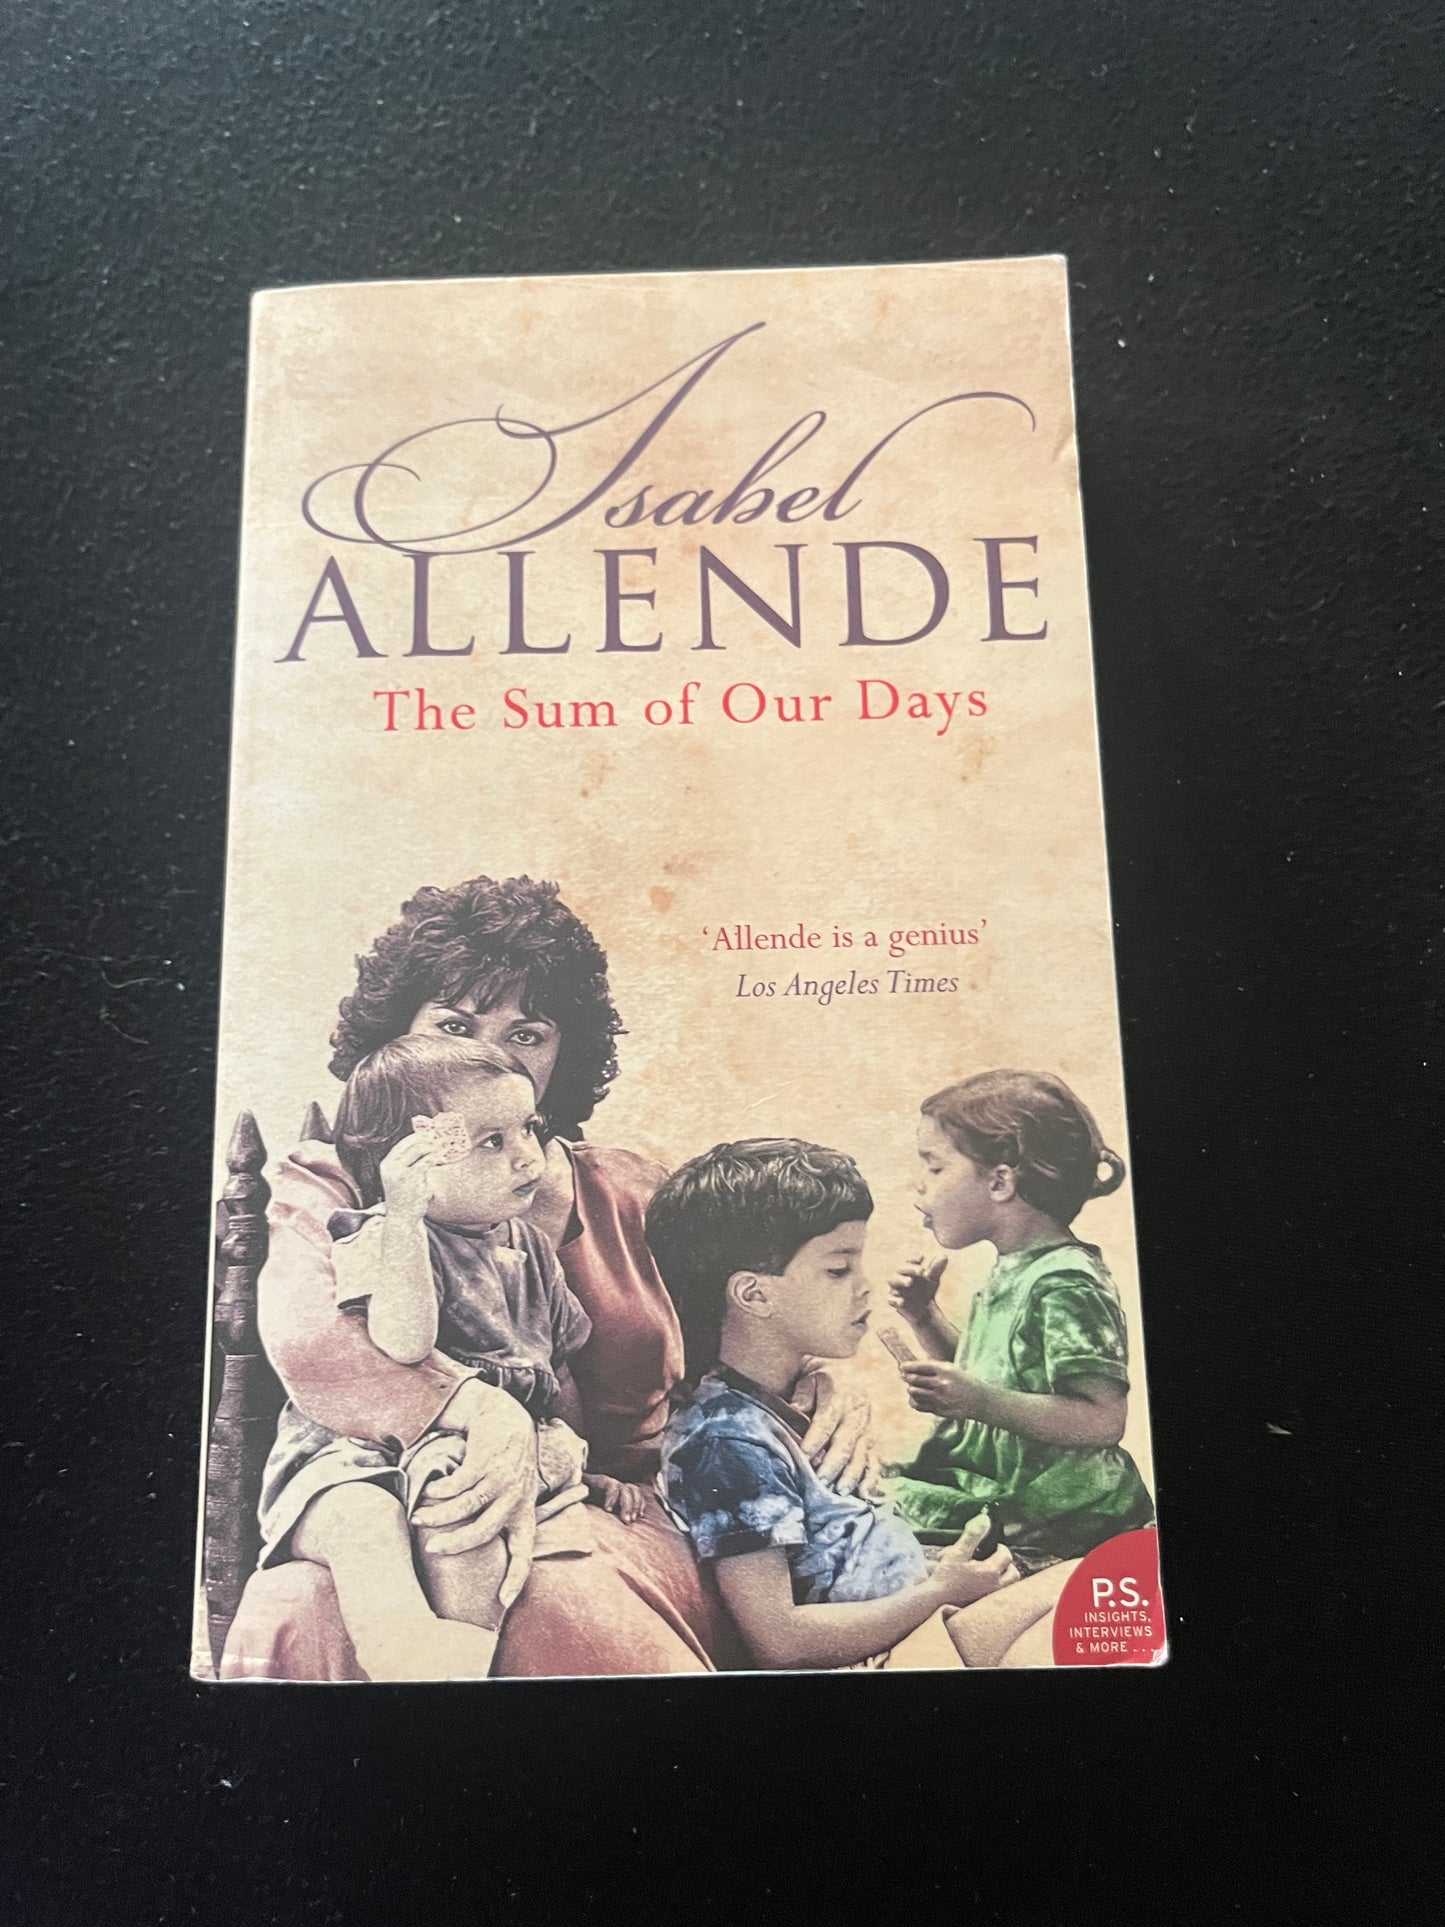 THE SUM OF OUR DAYS by Isabel Allende